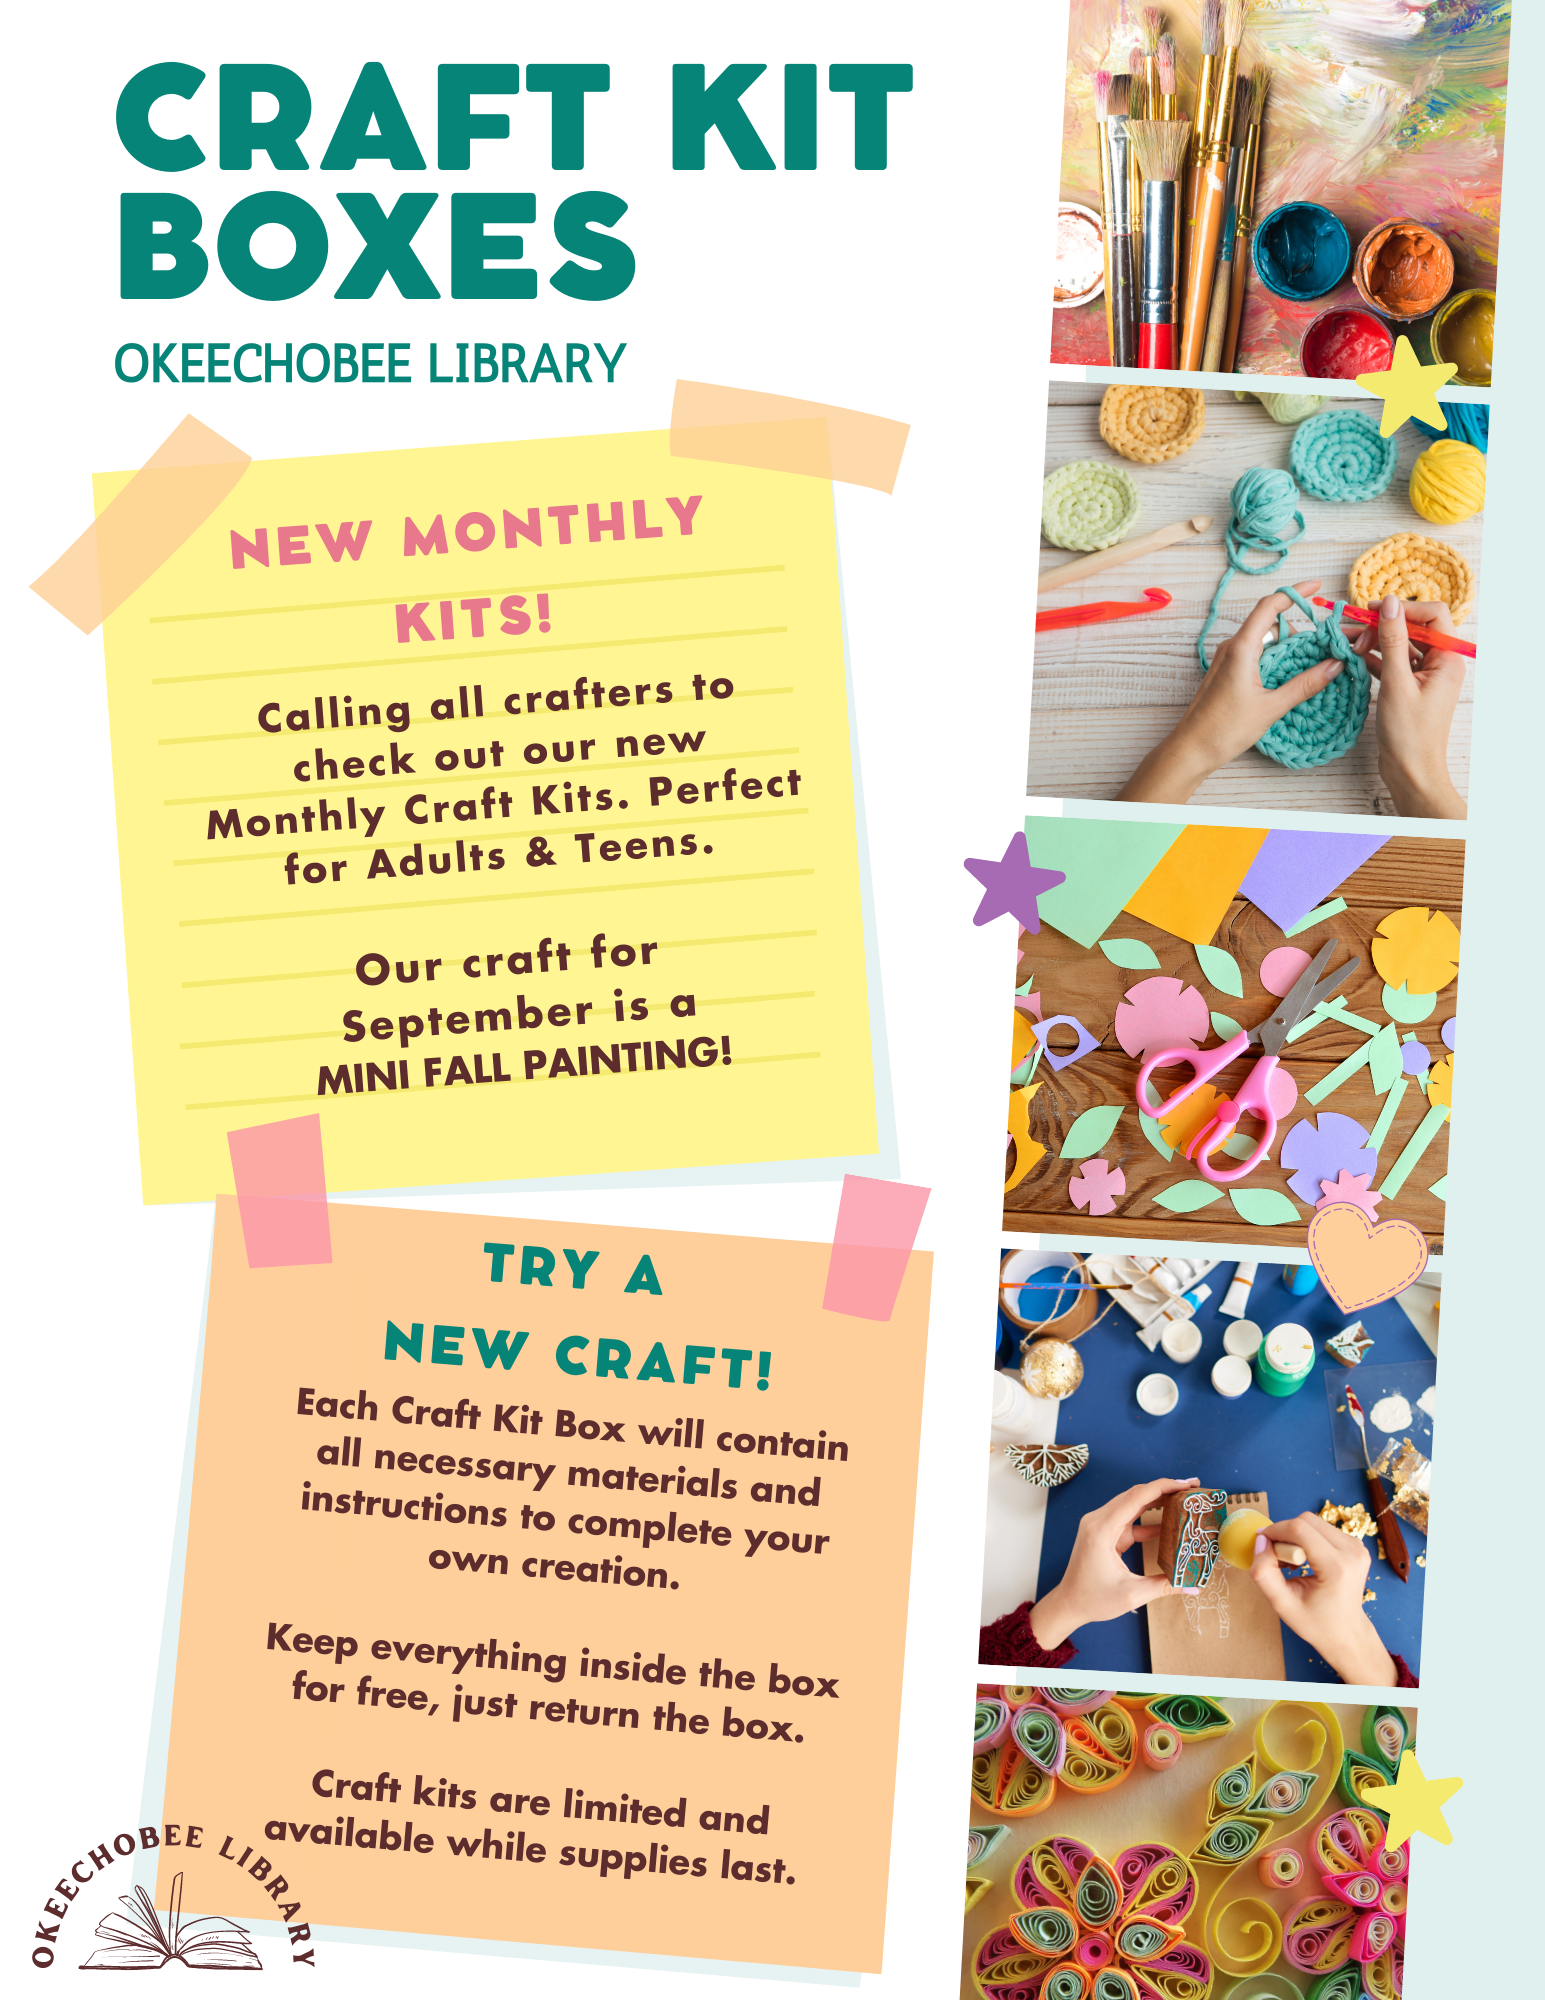 Our craft for September is a Mini Fall Painting. Each Craft Kit Box will contain all necessary materials and instructions to complete your own creation